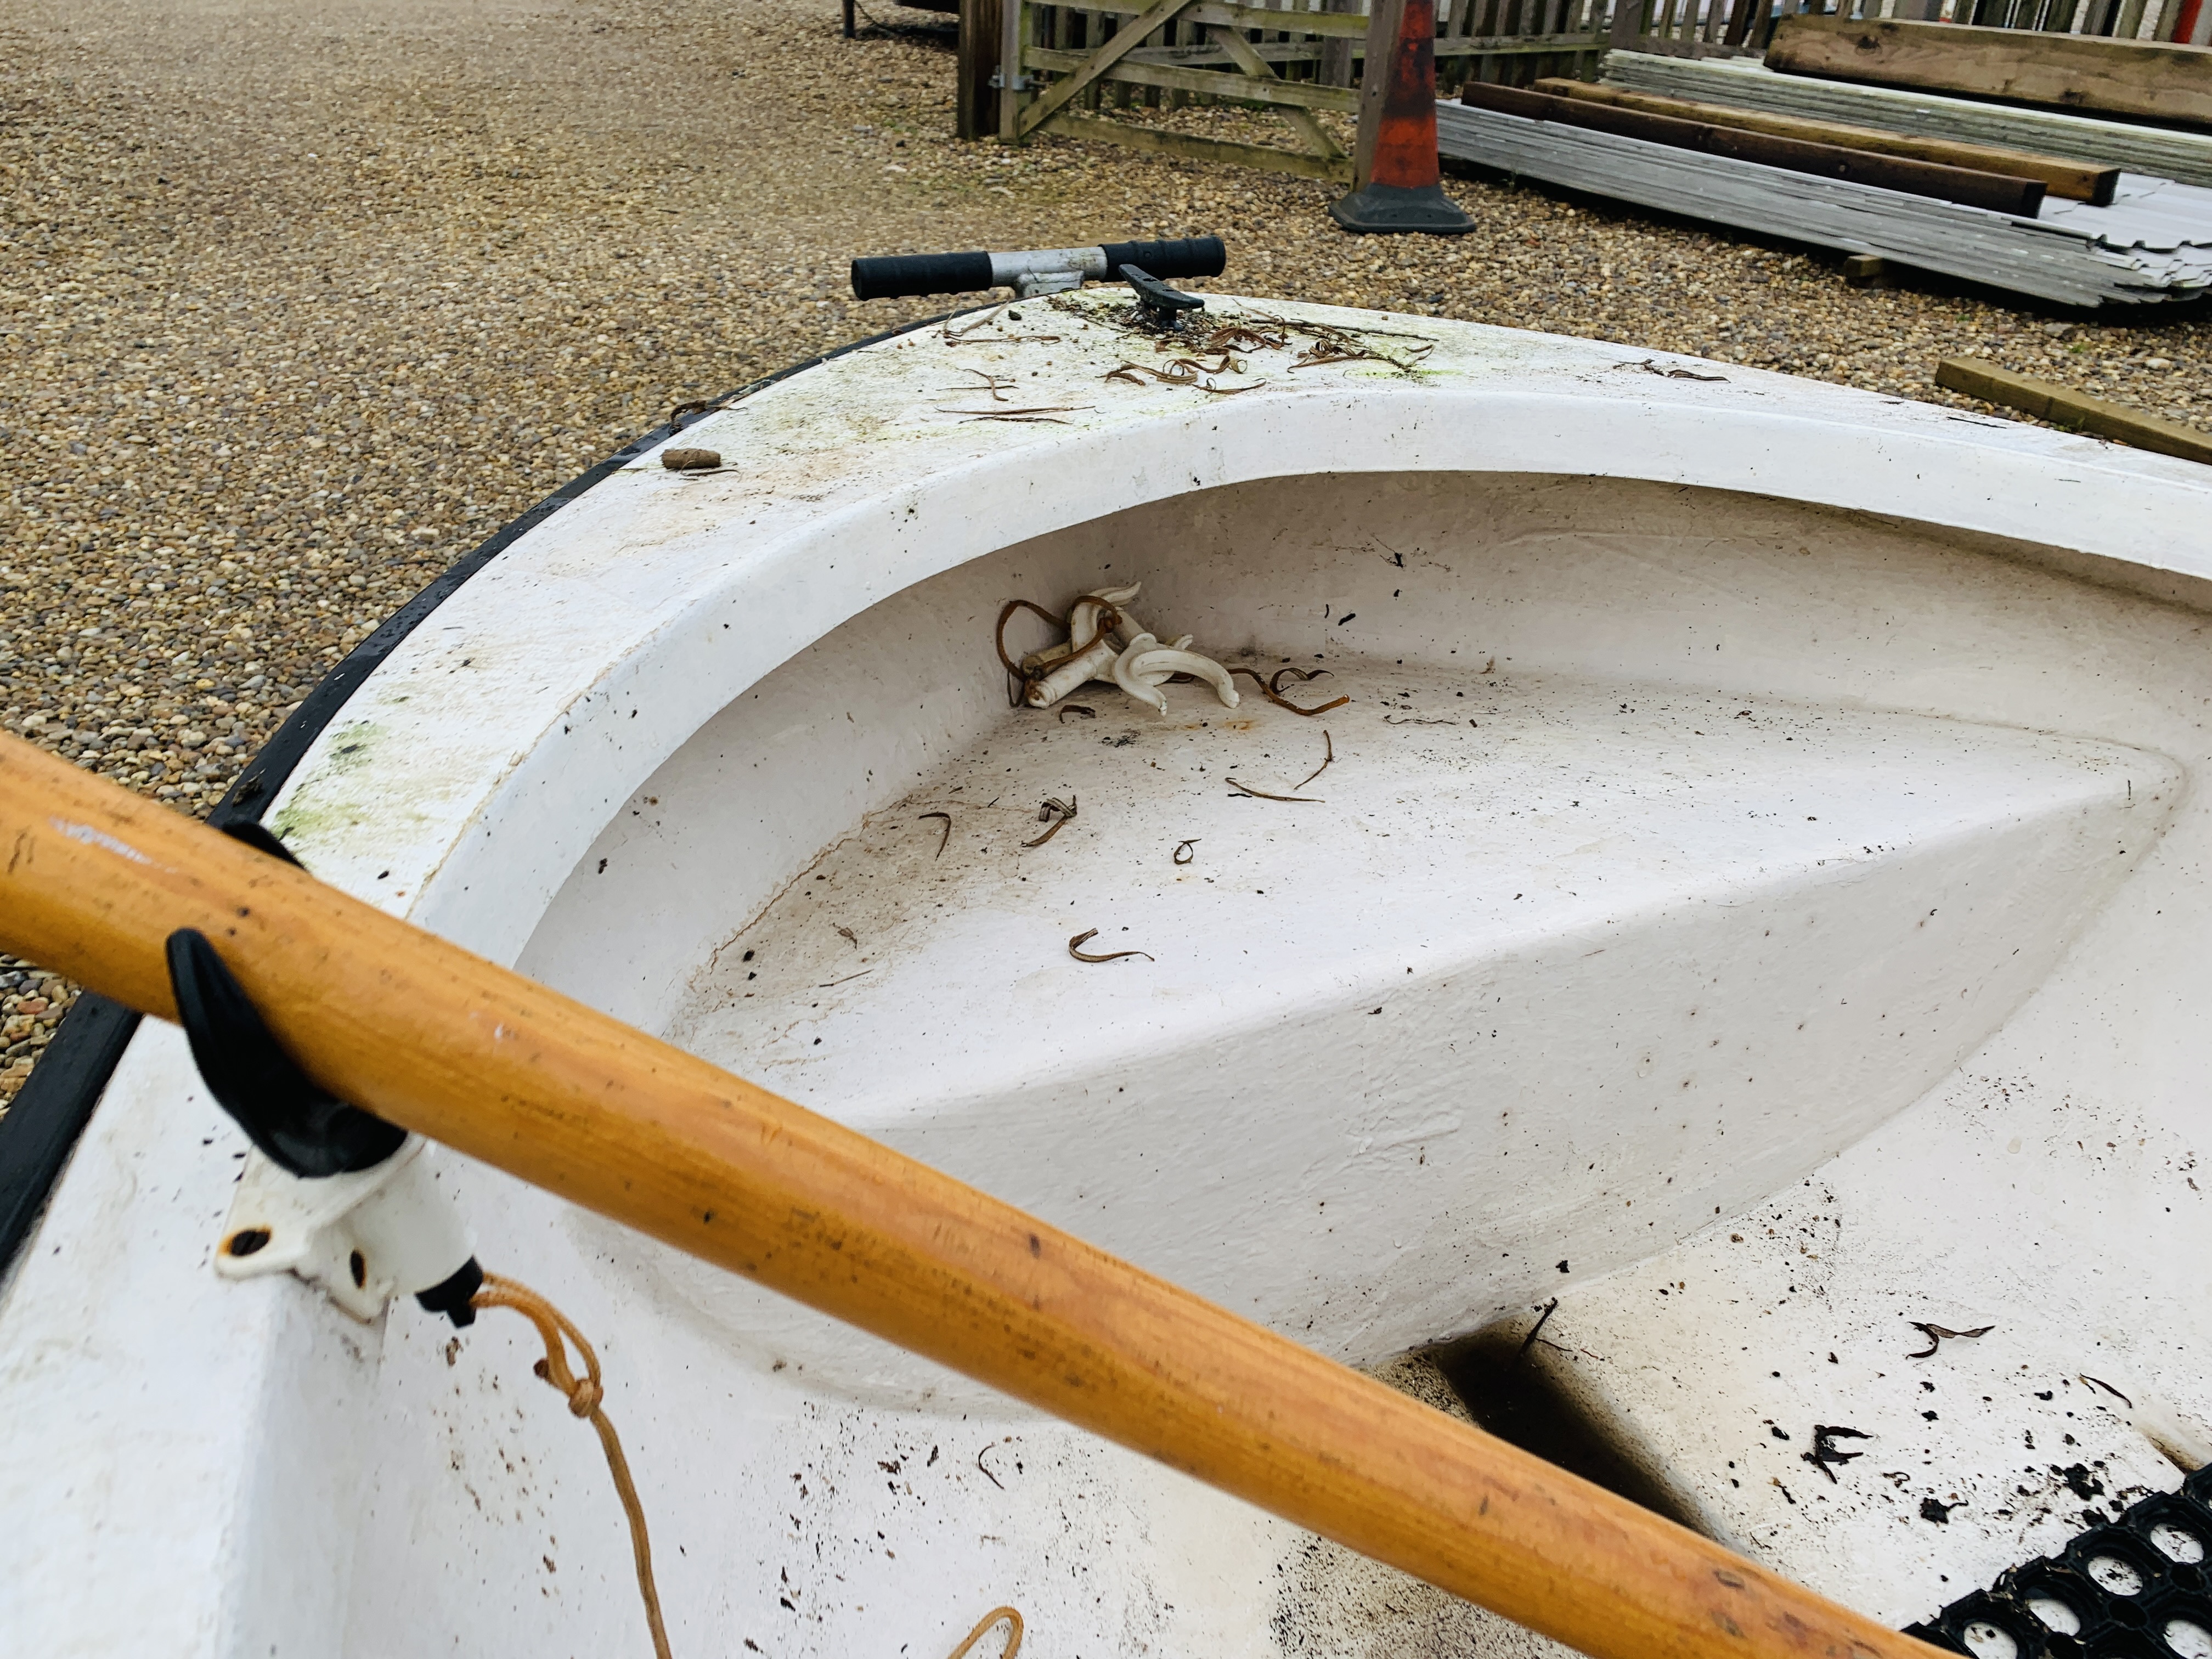 A 10FT FIBREGLASS ROWING DINGHY ON LAUNCHING TRAILER WITH OARS, - Image 11 of 12